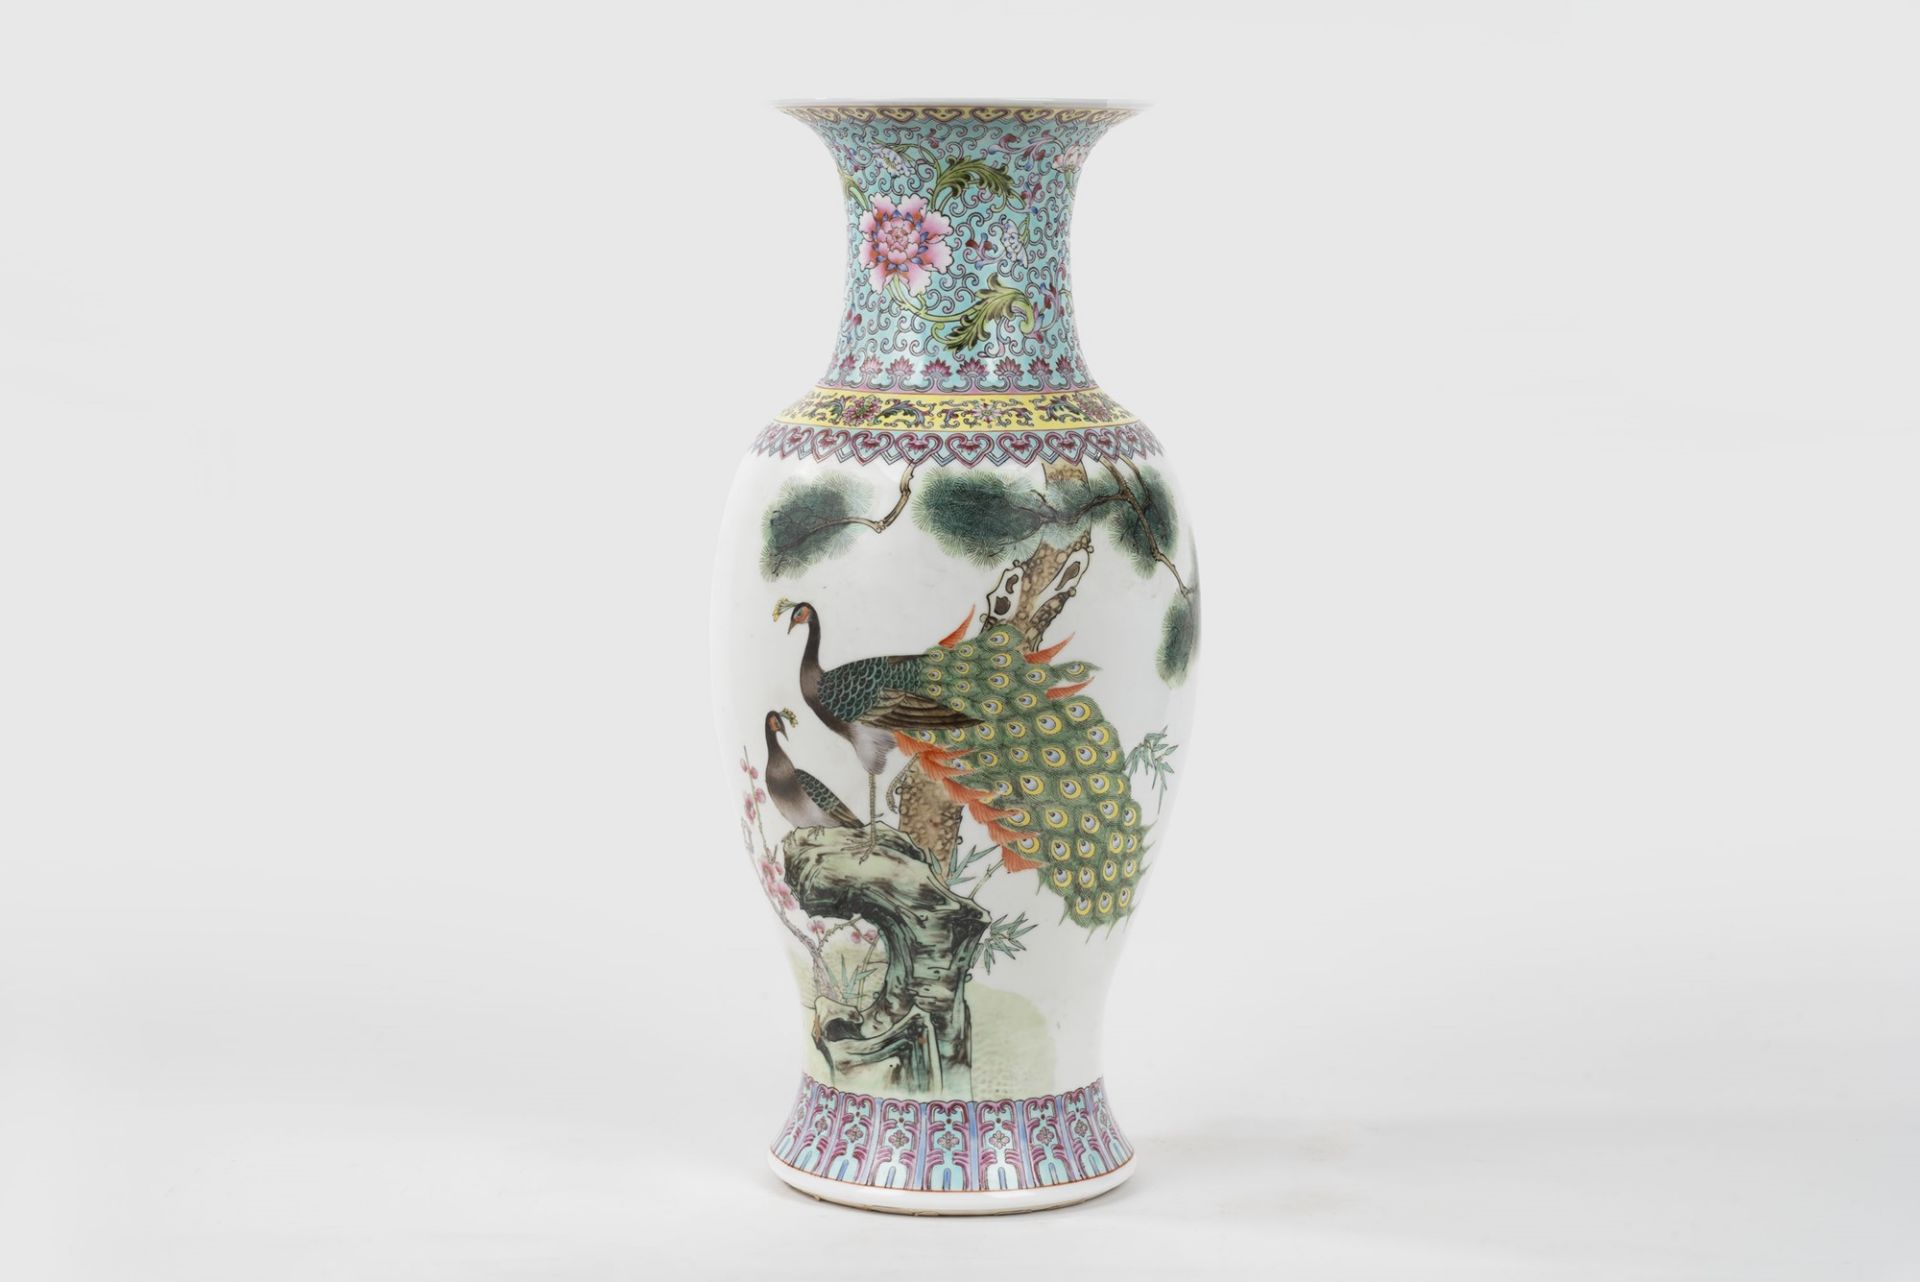 Polychrome porcelain vase with two peacocks on the body, China, 20th century